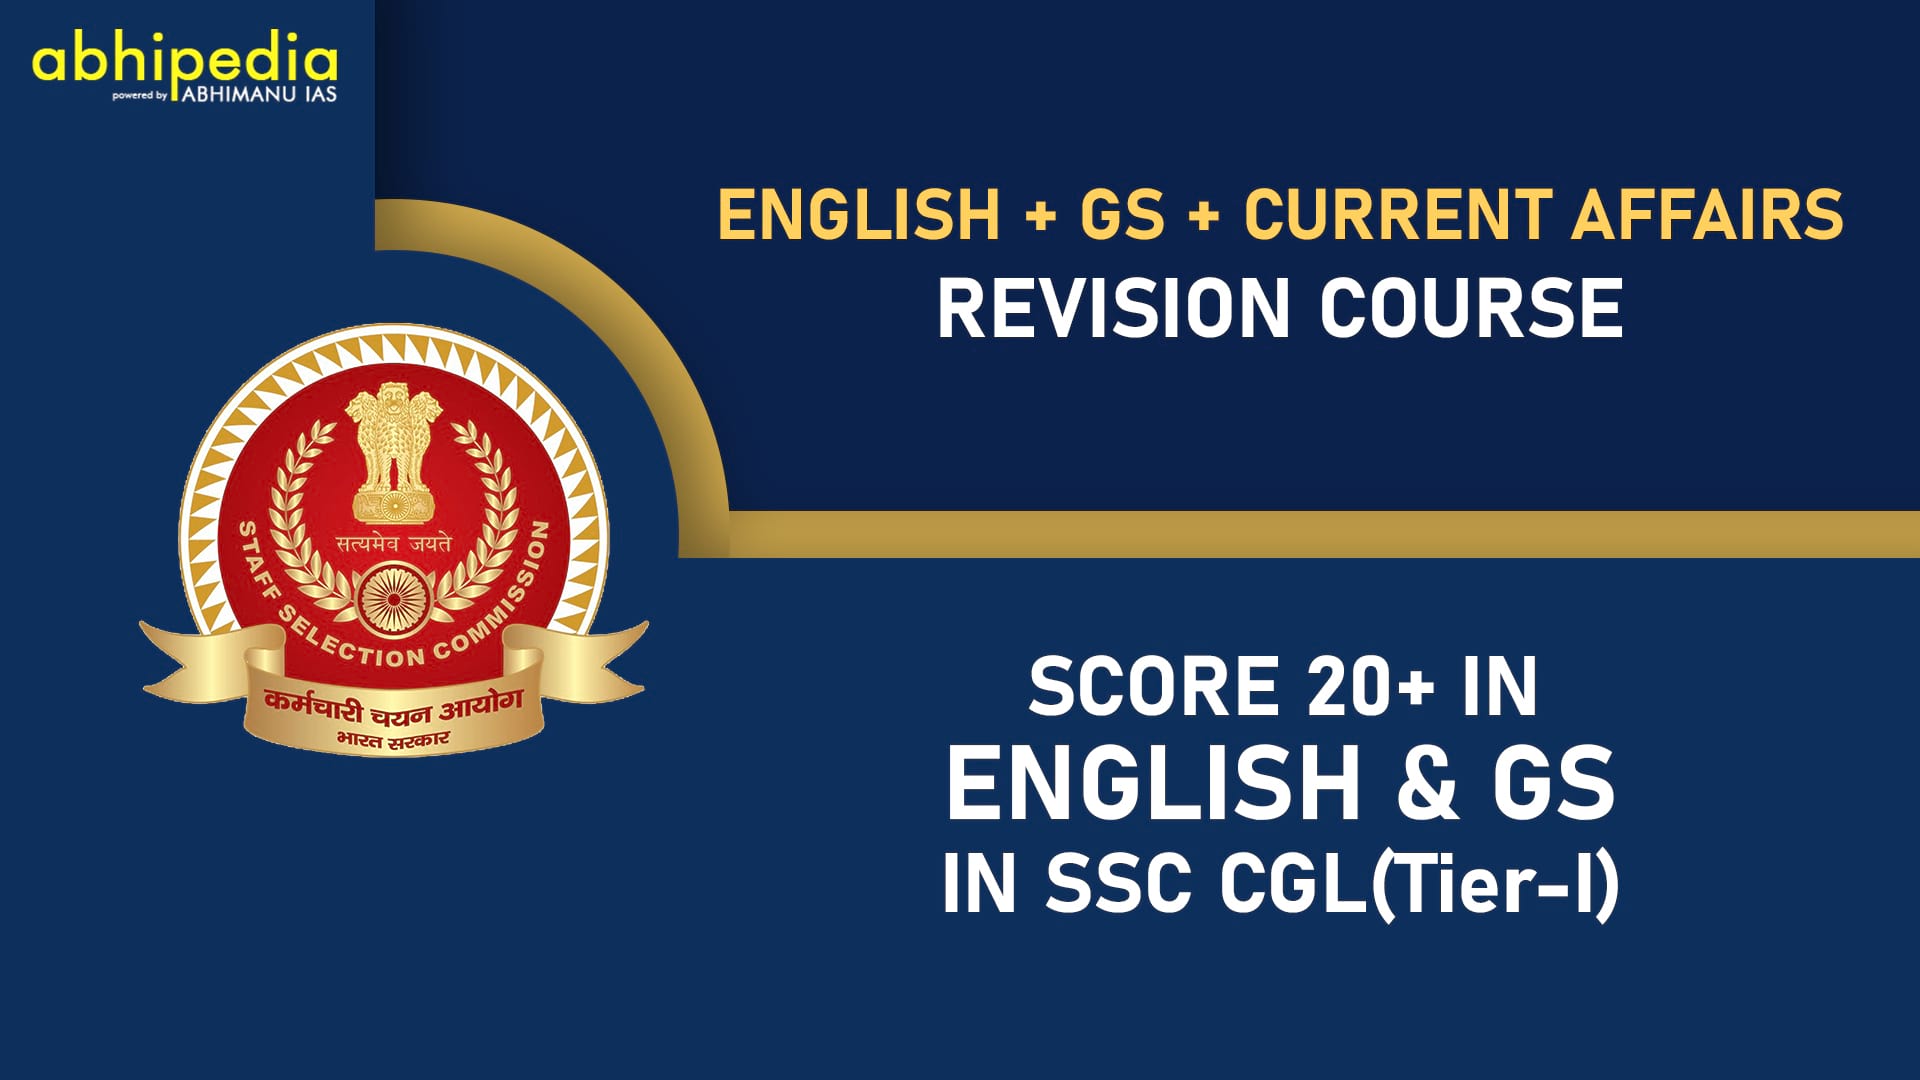 Courses - English + GS Revision Course for SSC CGL(Tier-1)